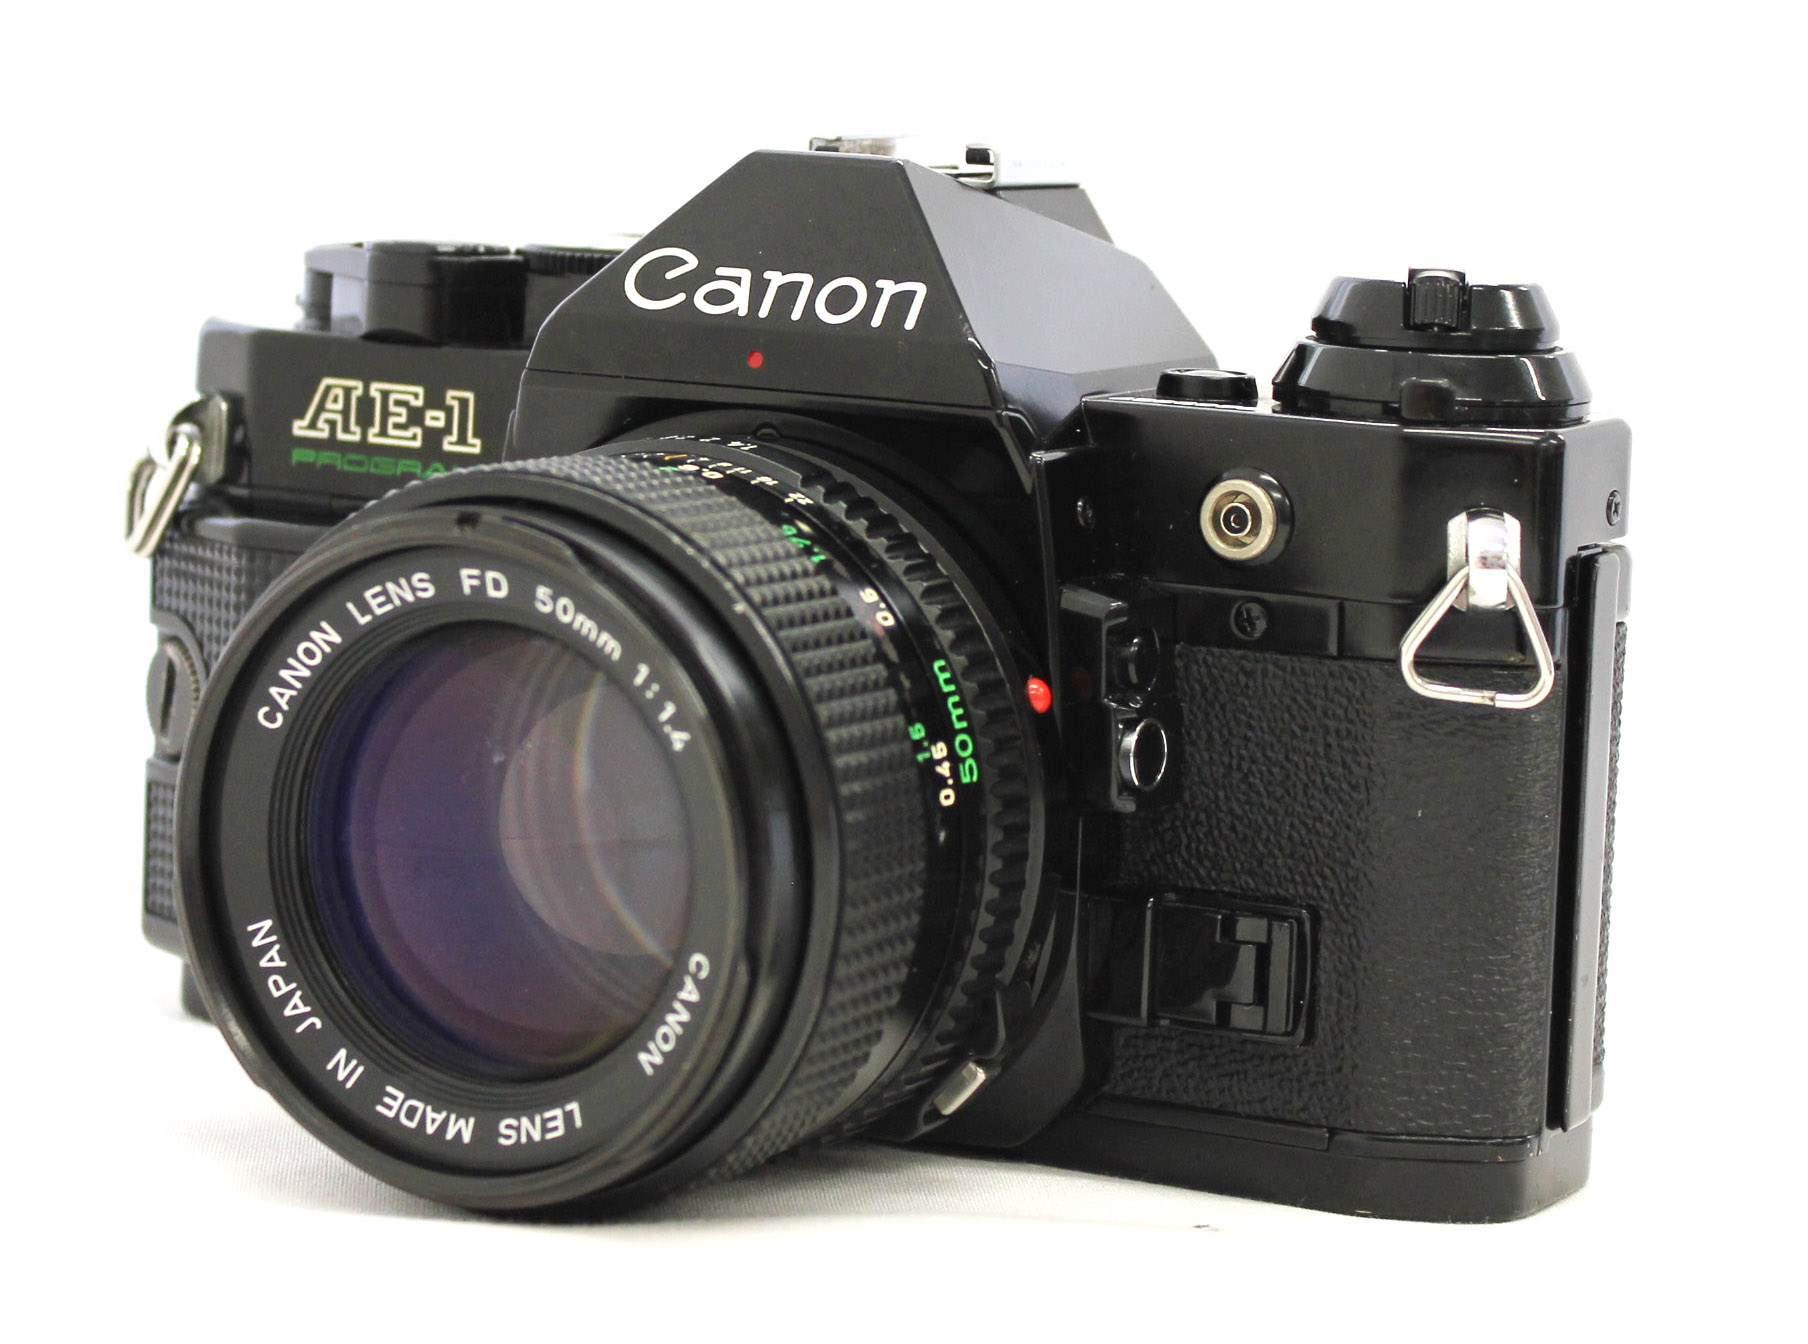 Japan Used Camera Shop | Canon AE-1 Program 35mm SLR Film Camera Black with New FD 50mm F/1.4 Lens from Japan